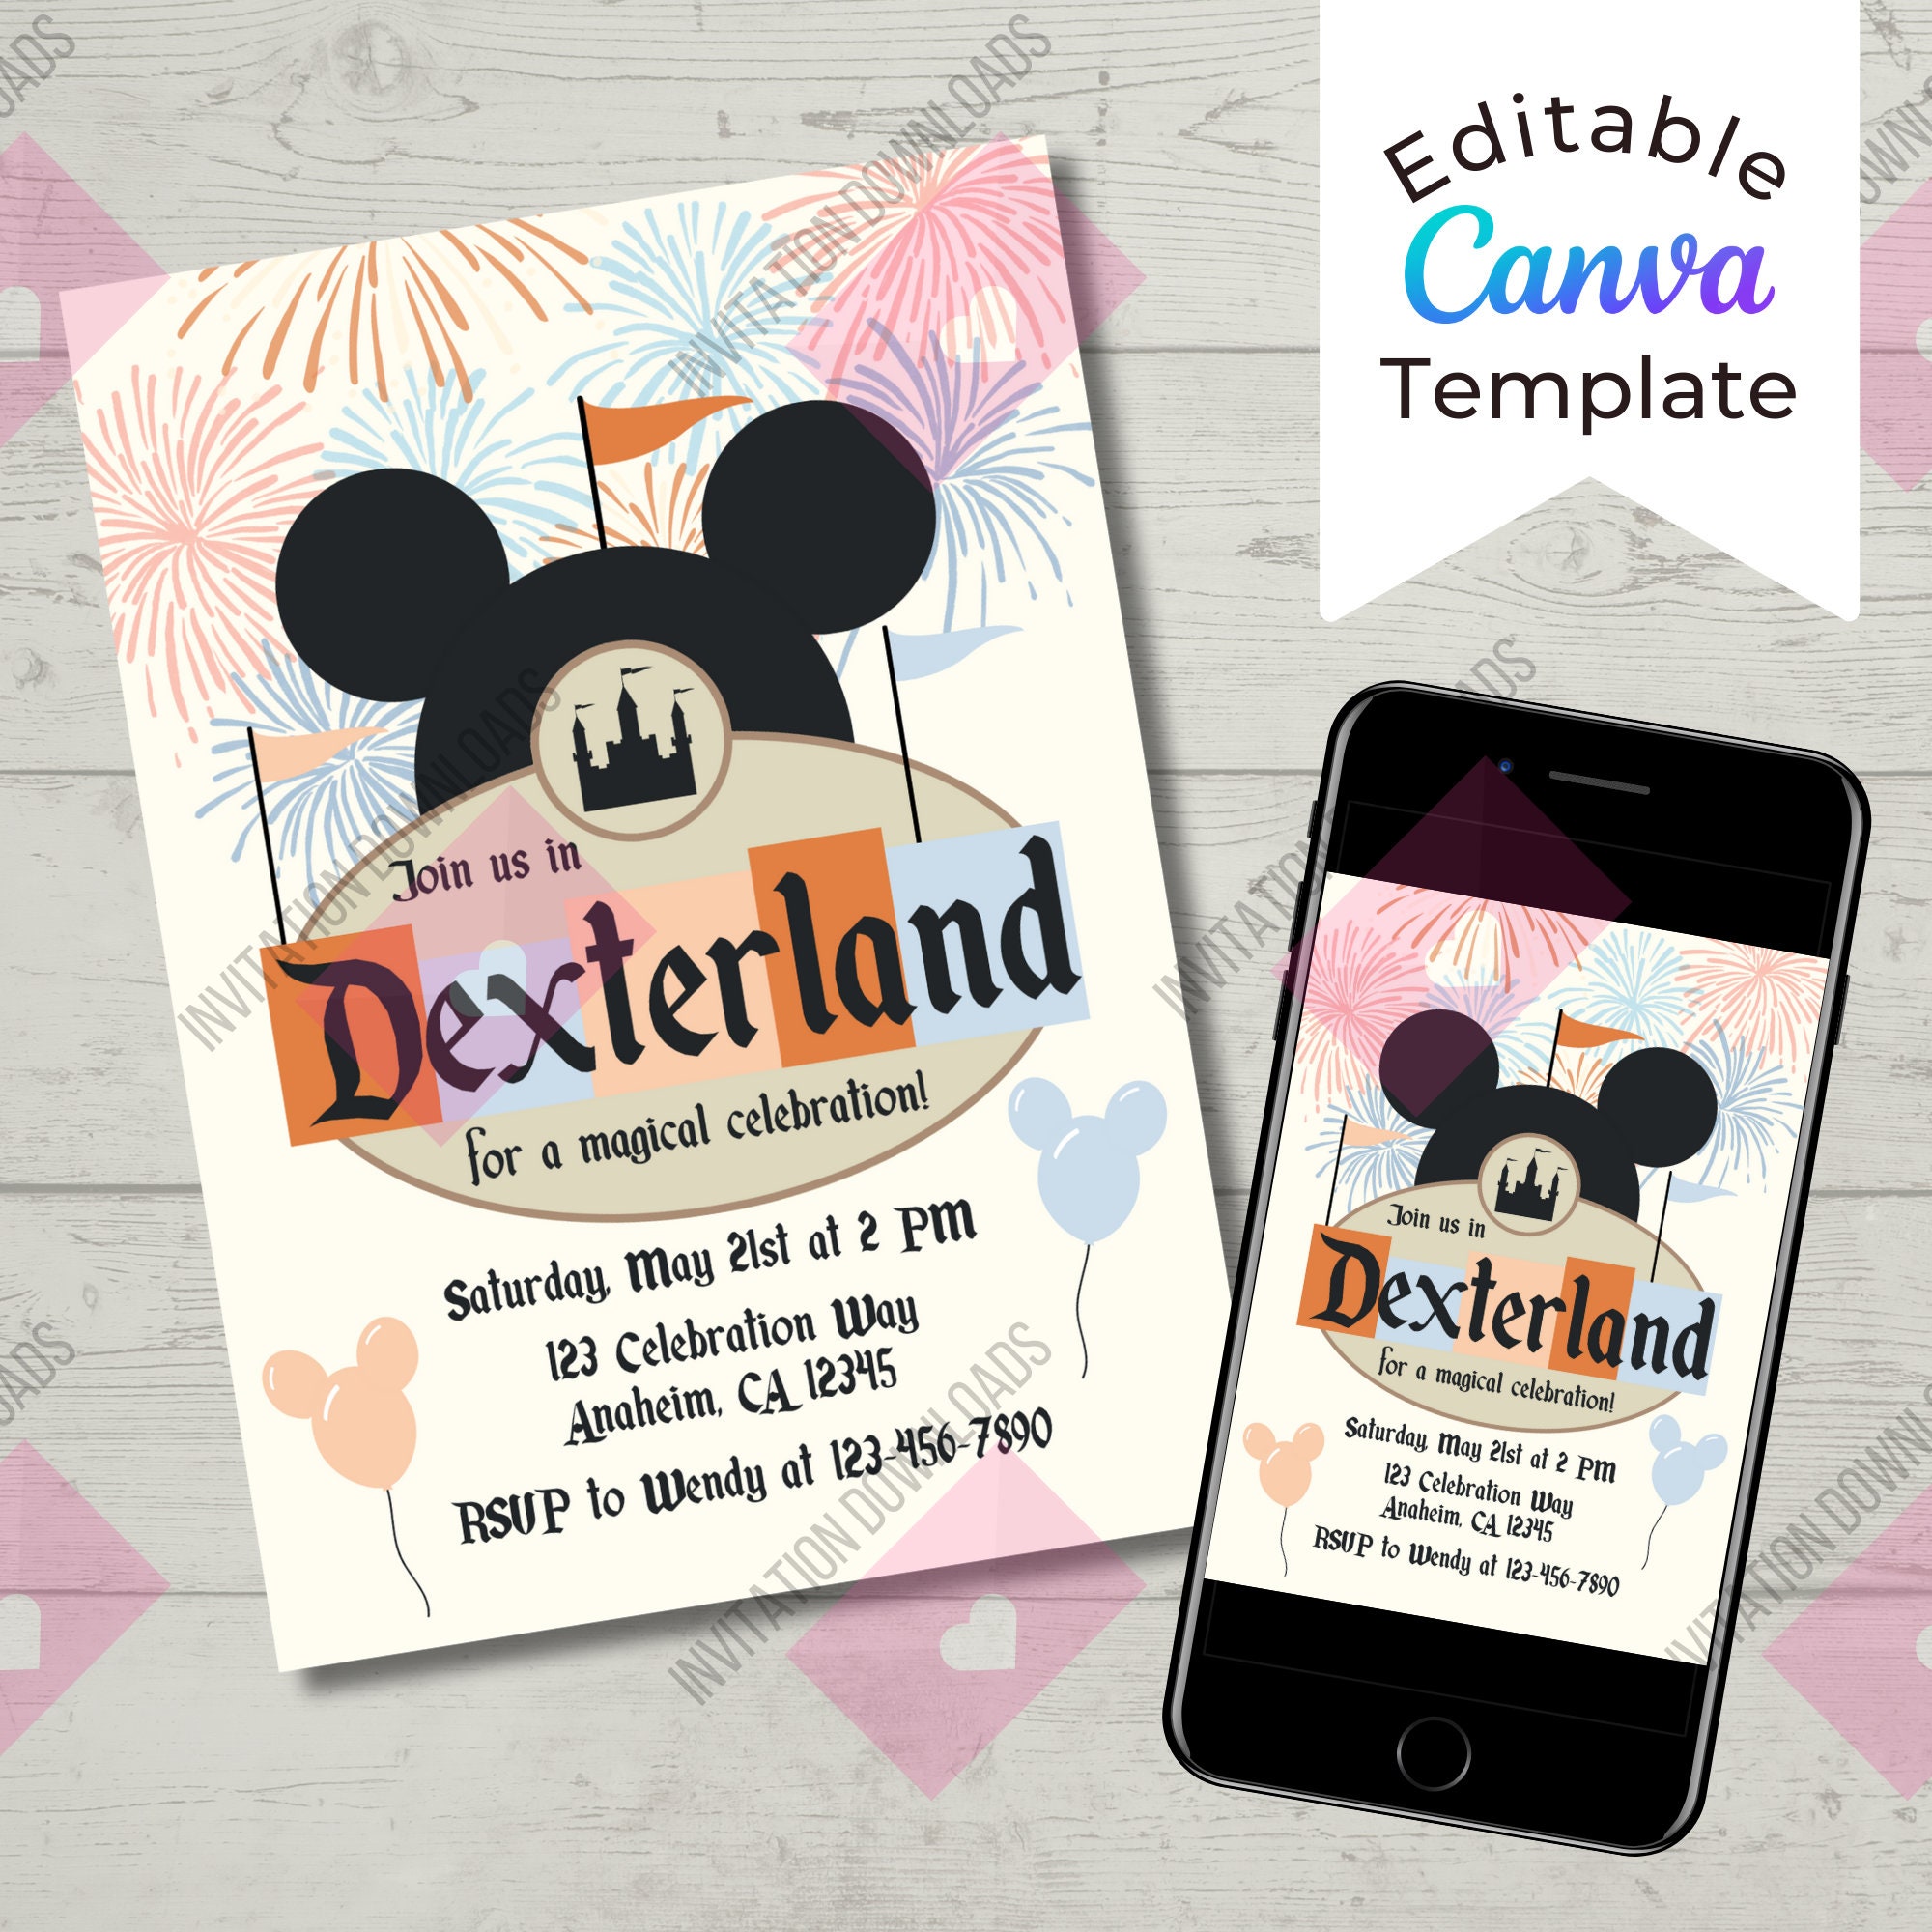 Classic Mickey Theme 8.5x11 Digital Paper Backgrounds for 